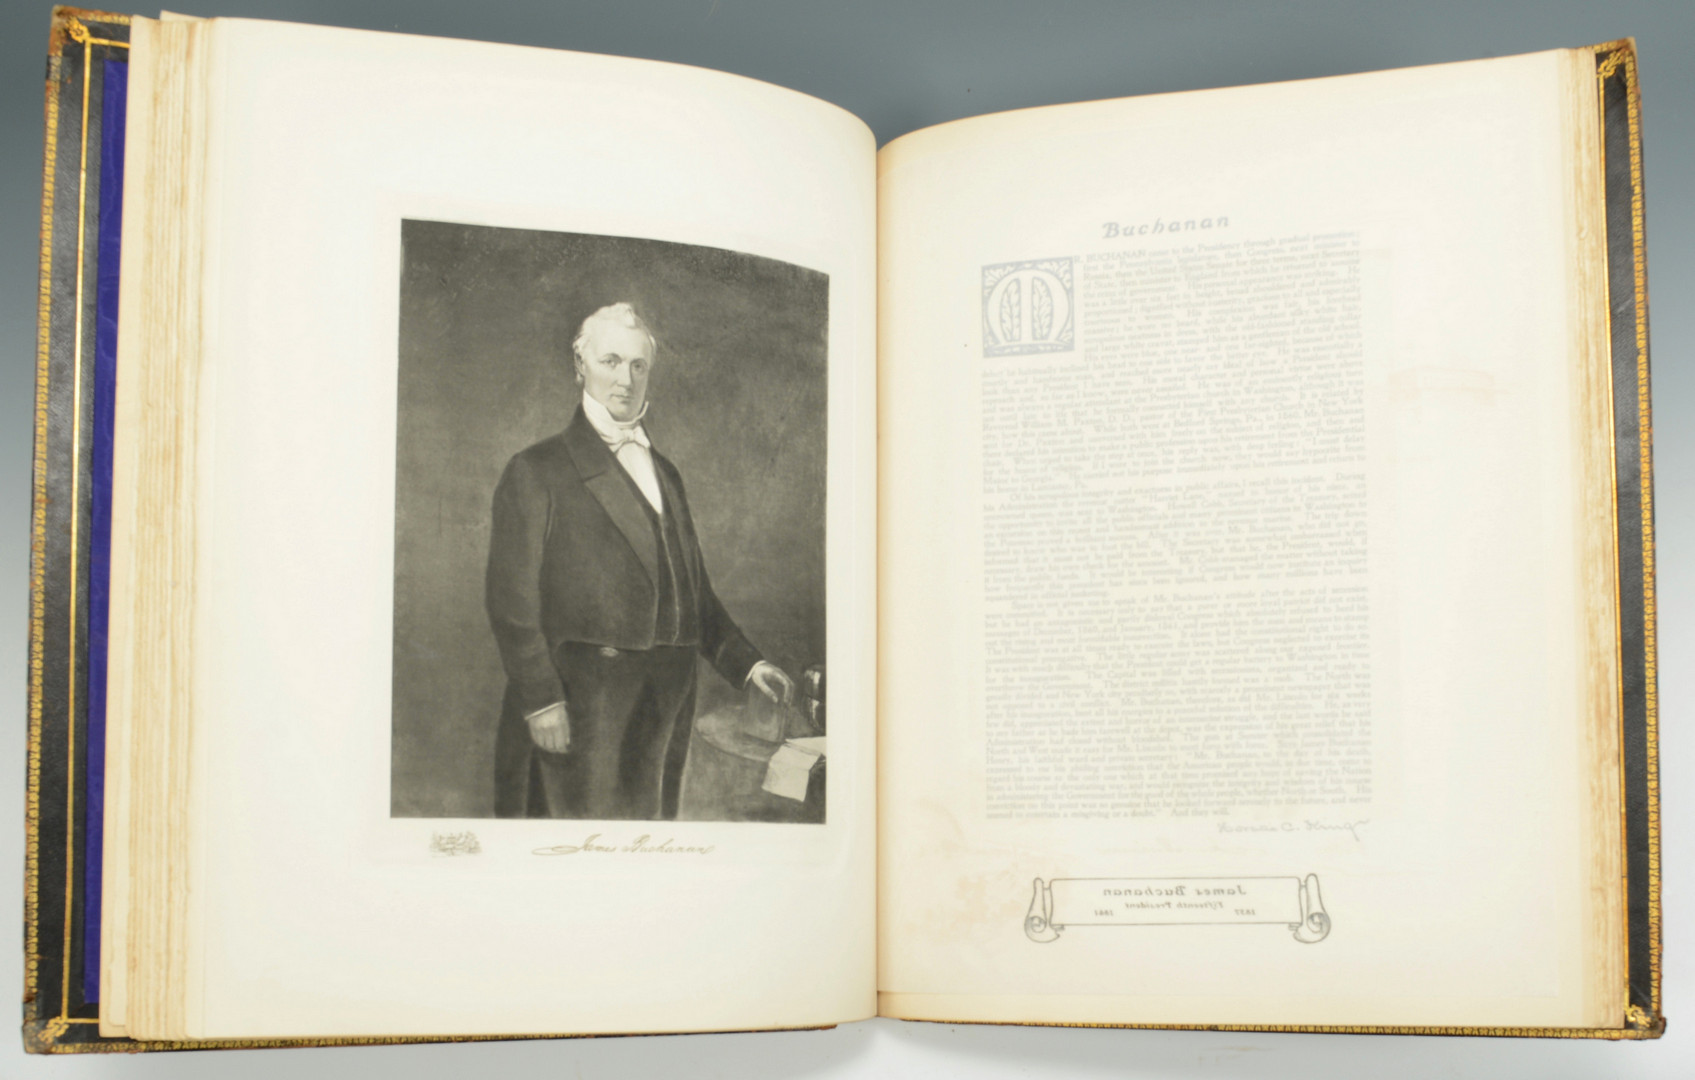 Lot 869: Large folio book, The Presidents